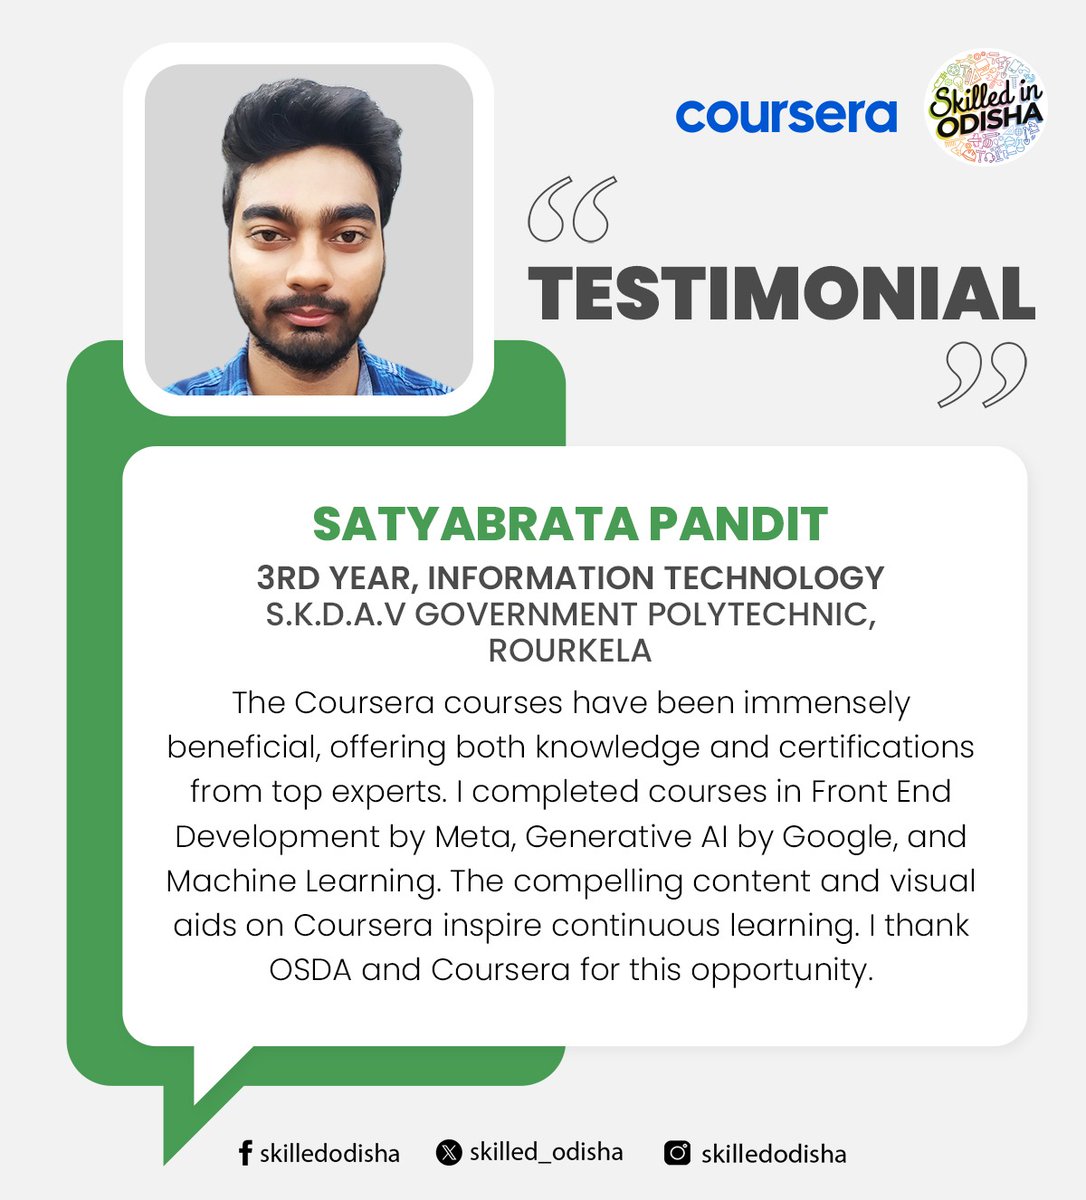 Satyabrata Pandit from S.K.D.A.V Government Polytechnic, Rourkela has learned Front End Development by Meta, Generative AI by Google, and Machine Learning on Coursera's platform. He thanks OSDA & Coursera for this opportunity. #SkilledInOdisha